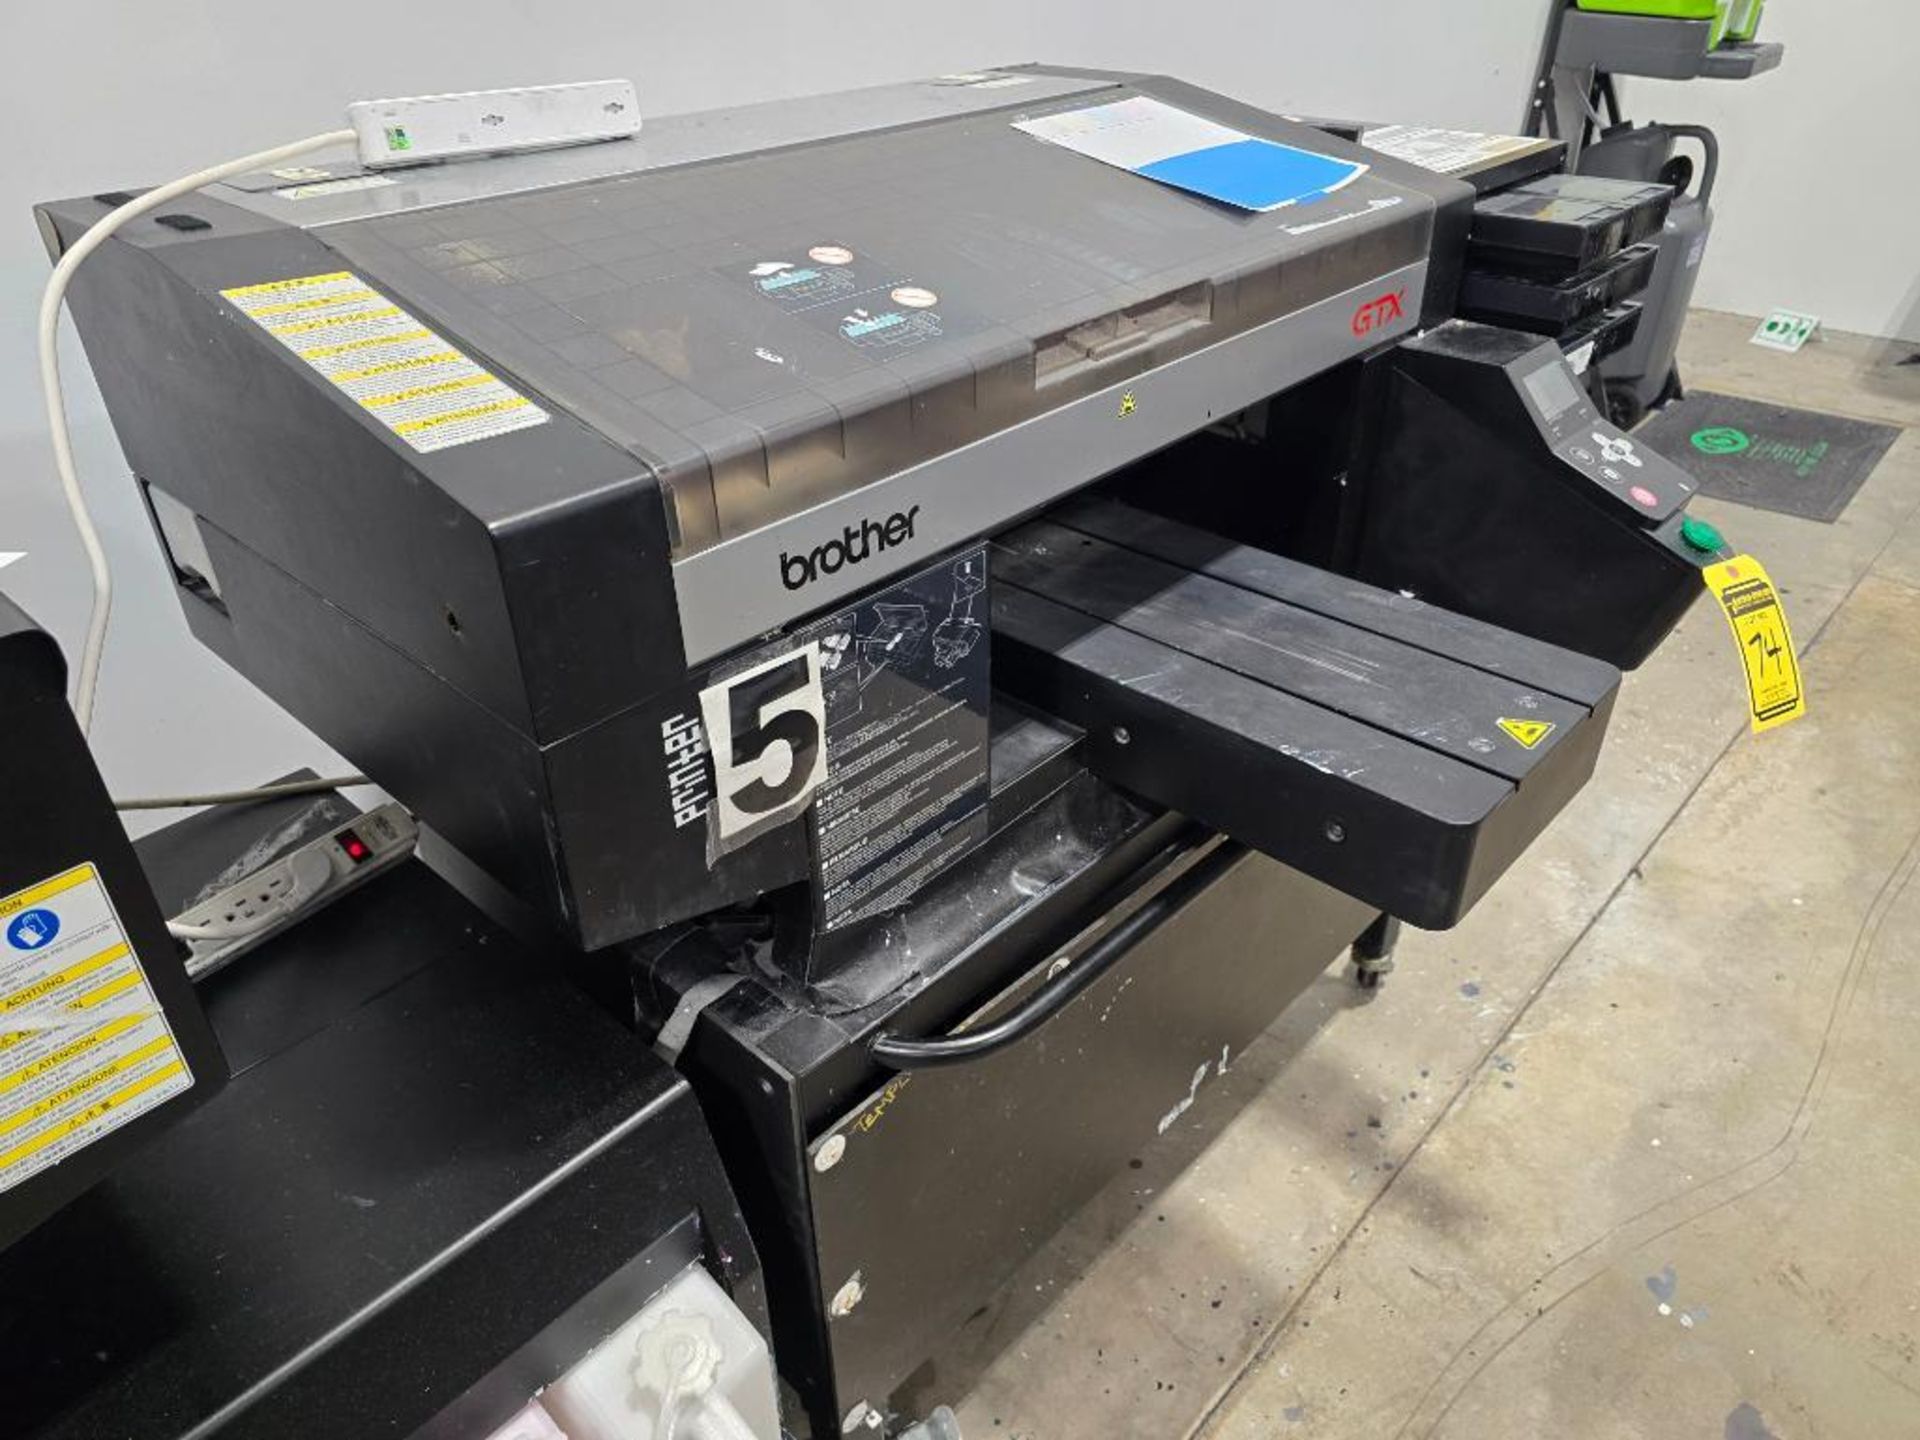 2018 Brother GTX-422 DTG (Direct to Garment) Printer, Twin Head, 6-Color, Water Based Pigmented Ink, - Image 5 of 10